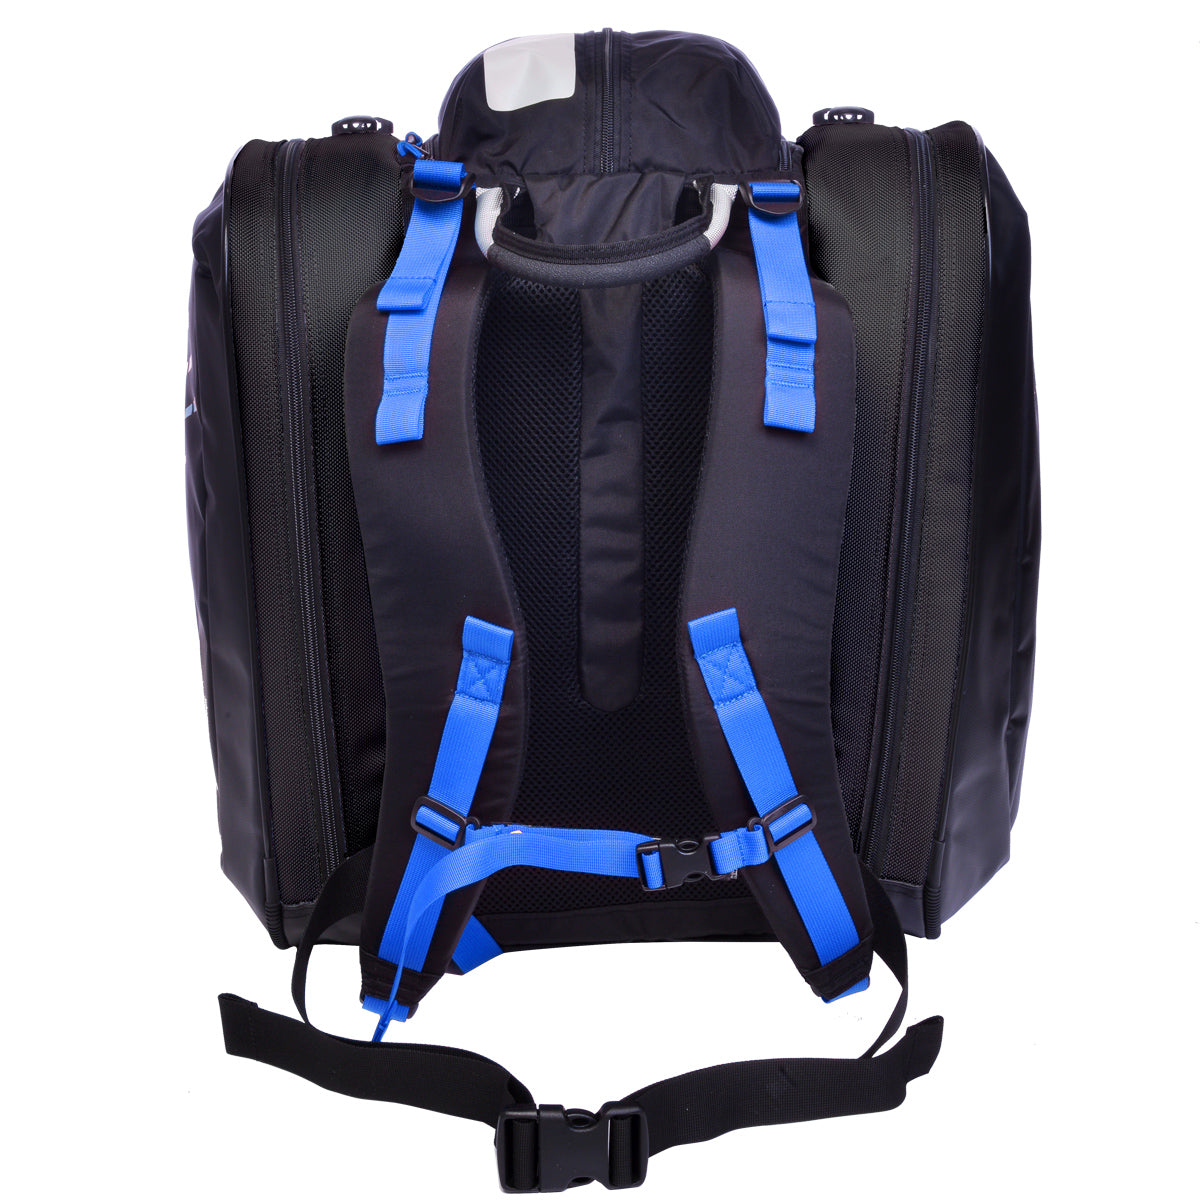 Kulkea heated ski boot bag, black with white and blue accents. Shoulder straps and plenty of zippered compartments.